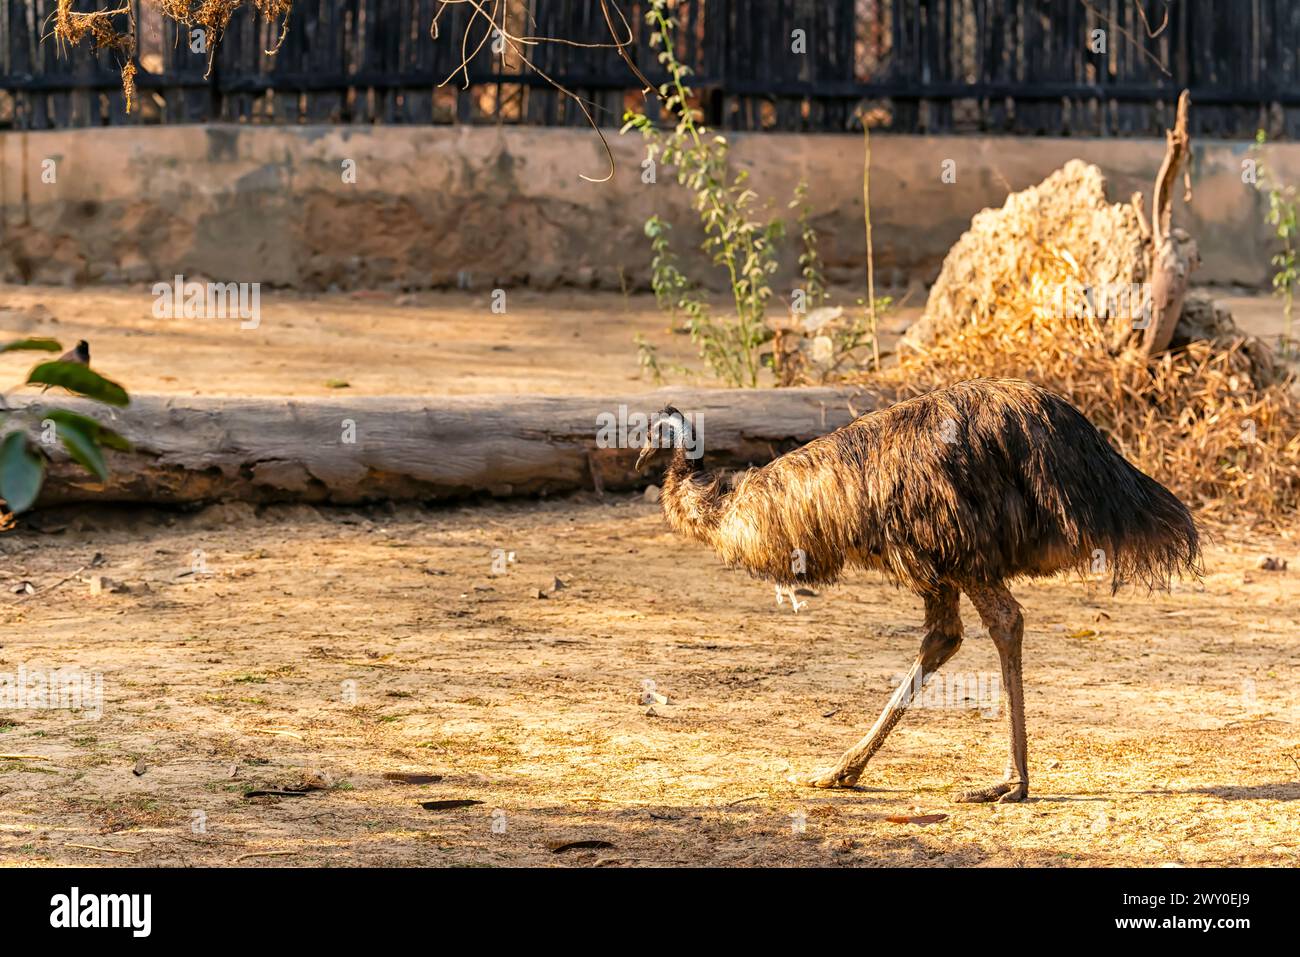 An Emu, a flightless bird from Australia, walking inside a enclosure at the National Zoological Park Delhi, also known as the Delhi Zoo. Stock Photo